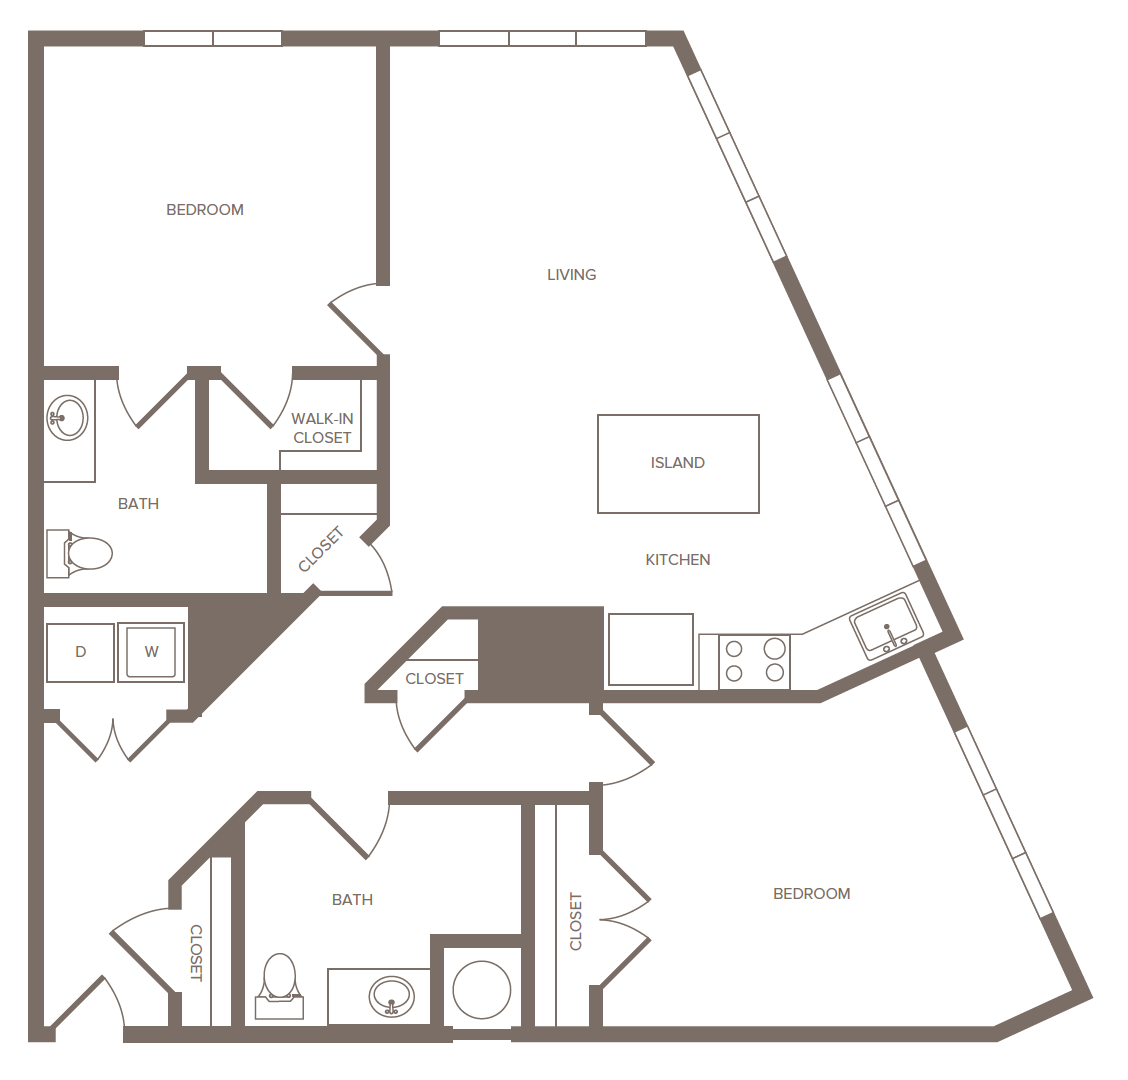 Floorplan for Apartment #2183, 2 bedroom unit at Halstead Parsippany